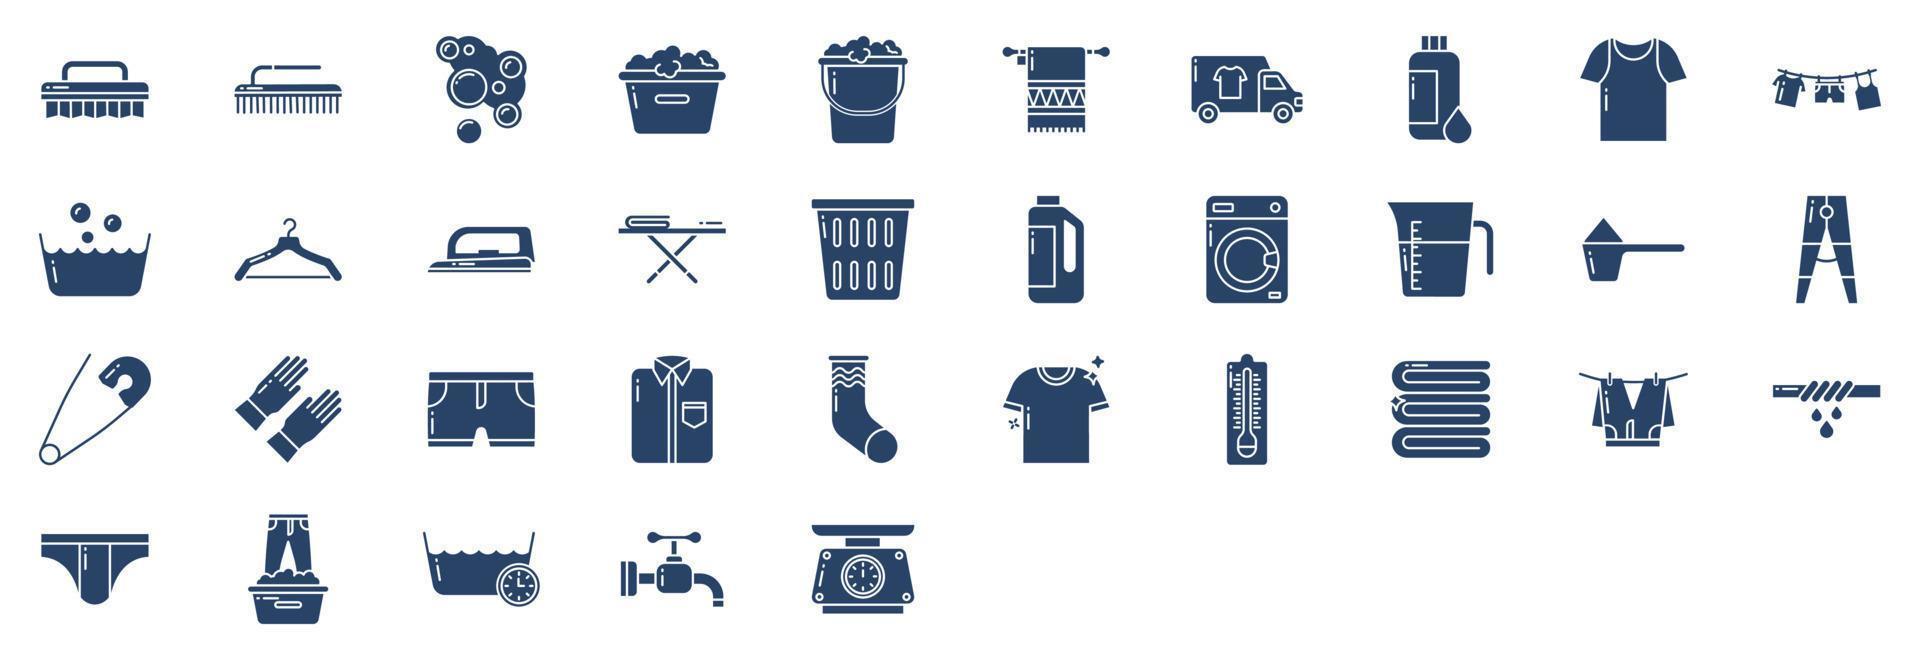 Collection of icons related to Laundry and dry cleaners, including icons like Cloth, Bucket, wash, Dress and more. vector illustrations, Pixel Perfect set